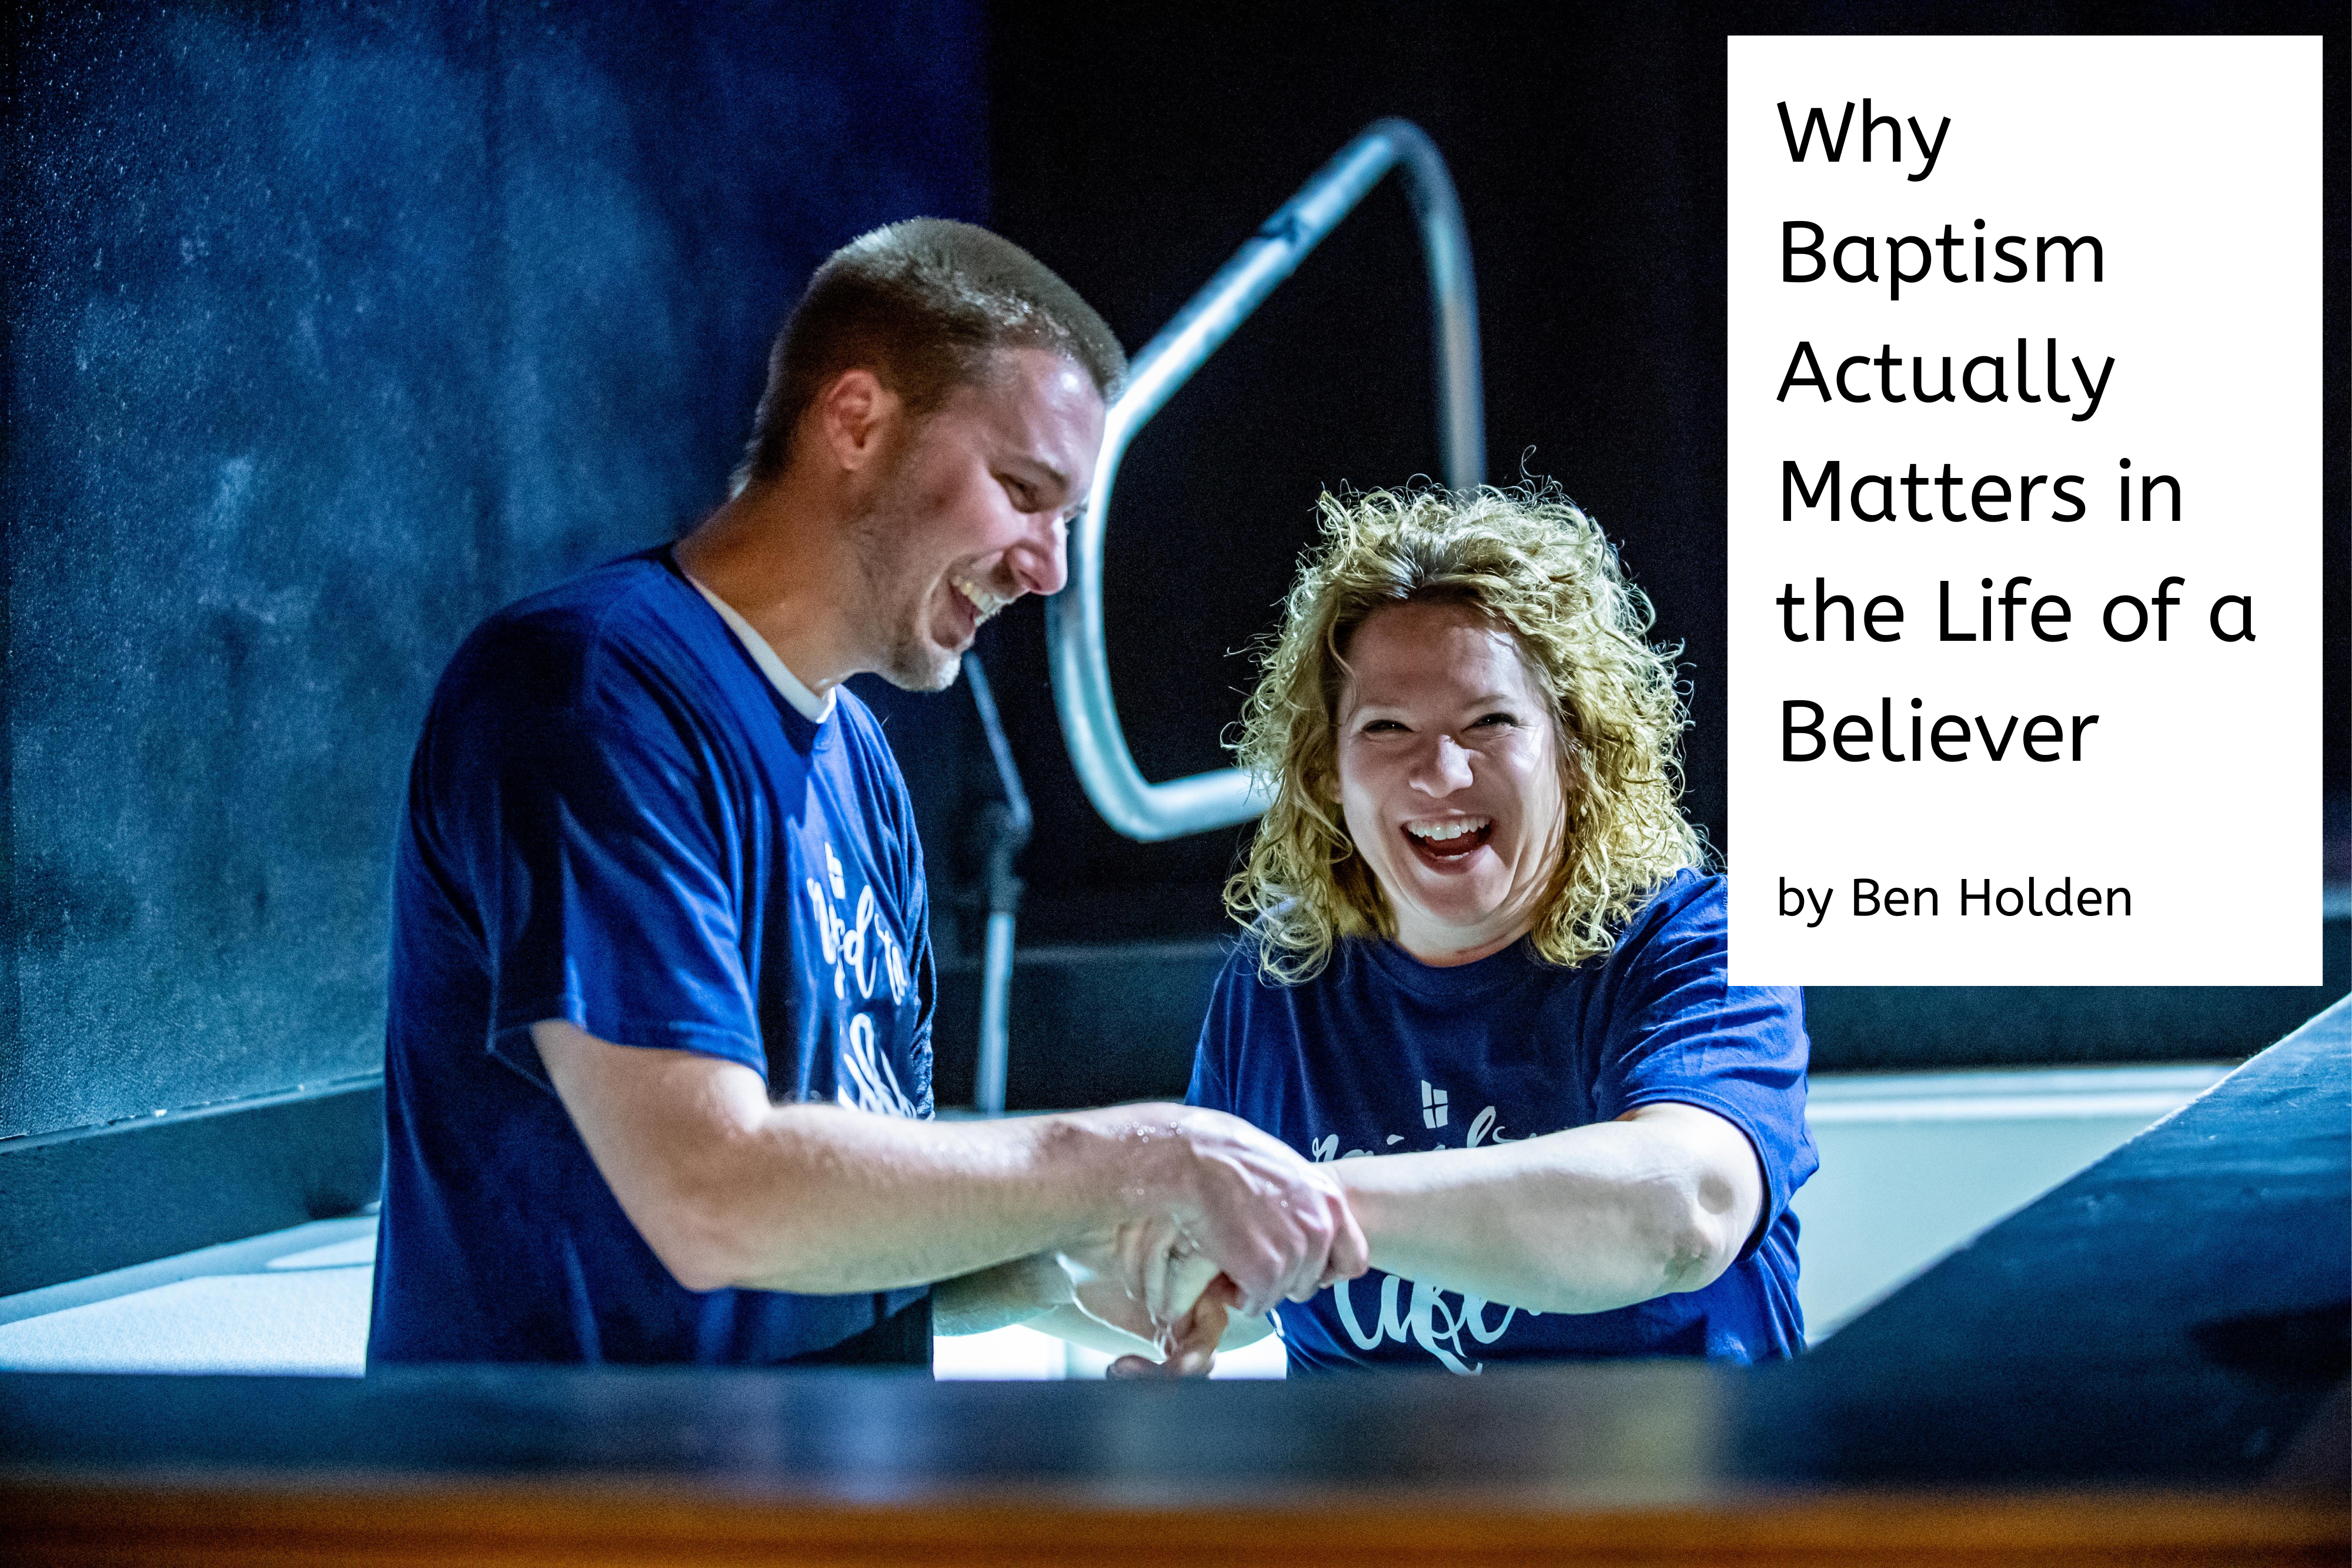 why-baptism-actually-matters-in-the-life-of-a-believer